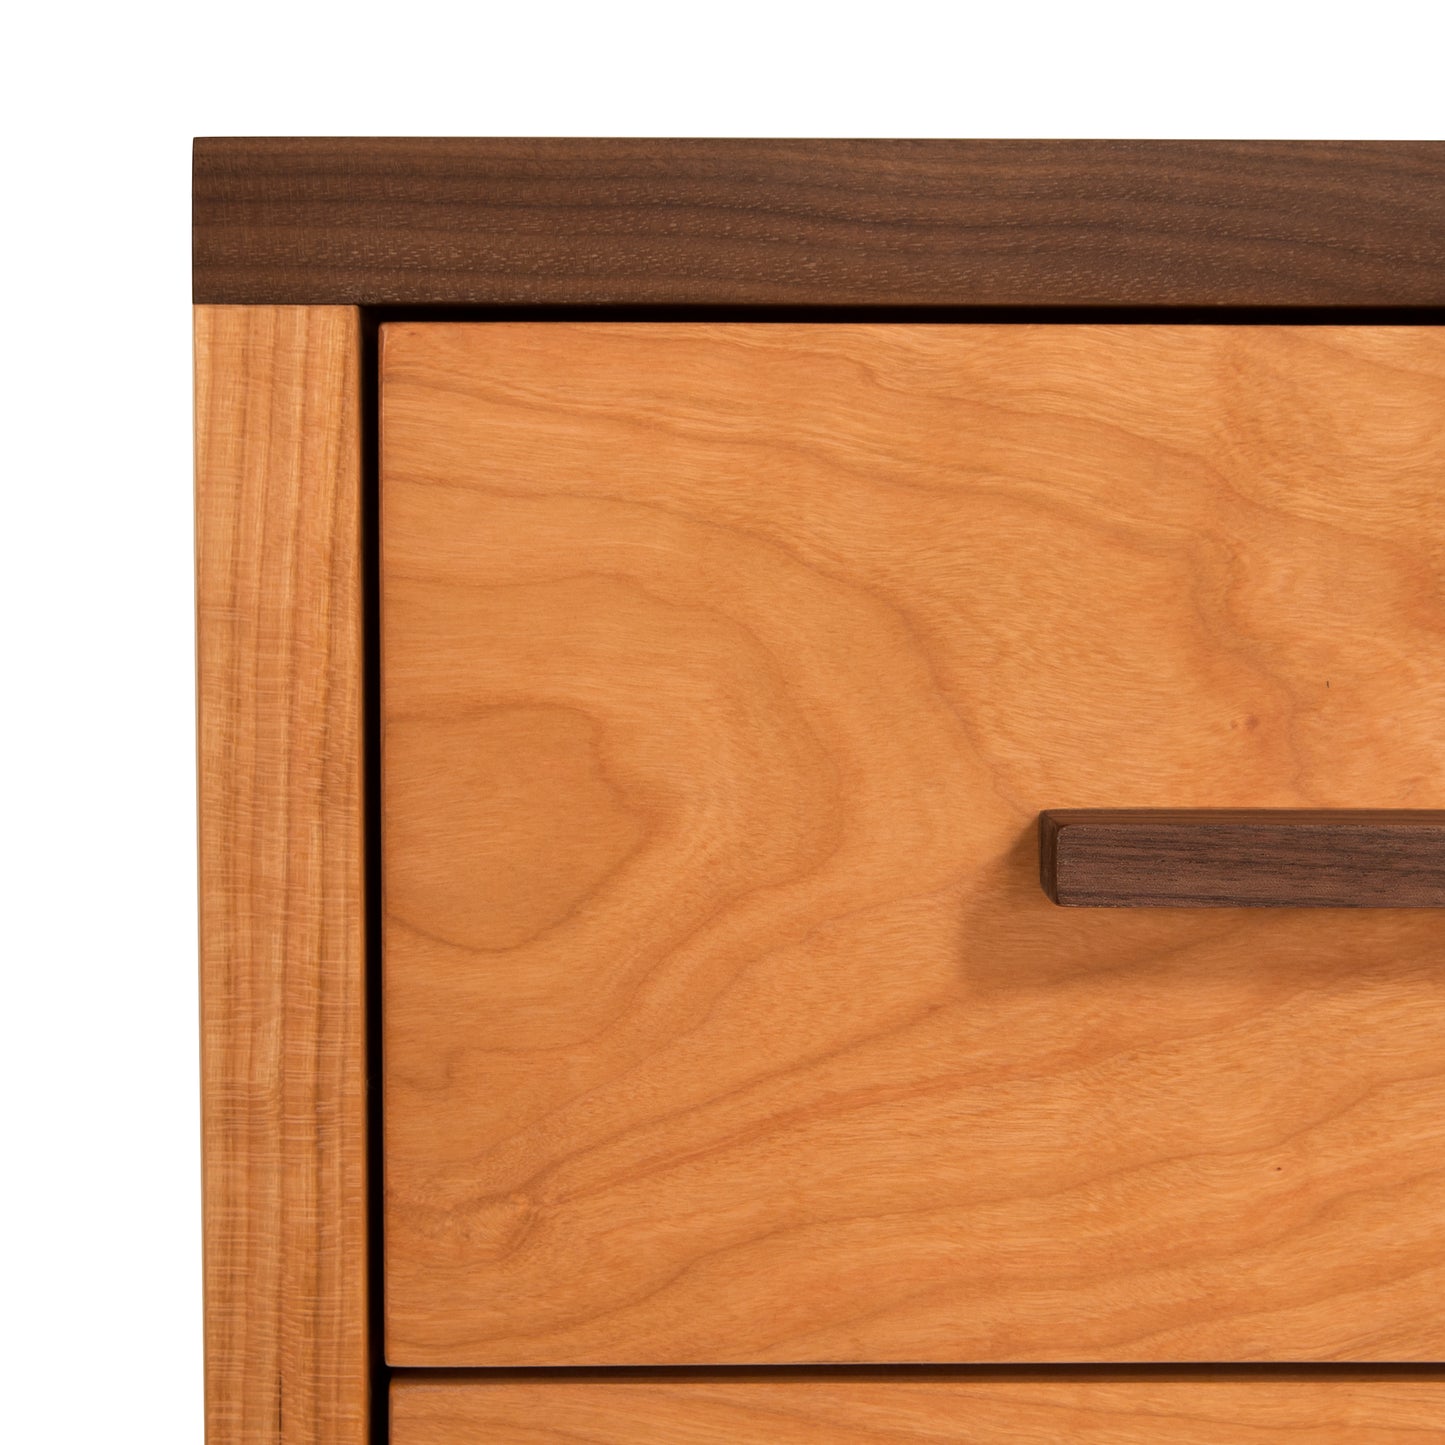 A close up of a Modern American 3-Drawer Nightstand from Vermont Furniture Designs with a contemporary wooden handle.